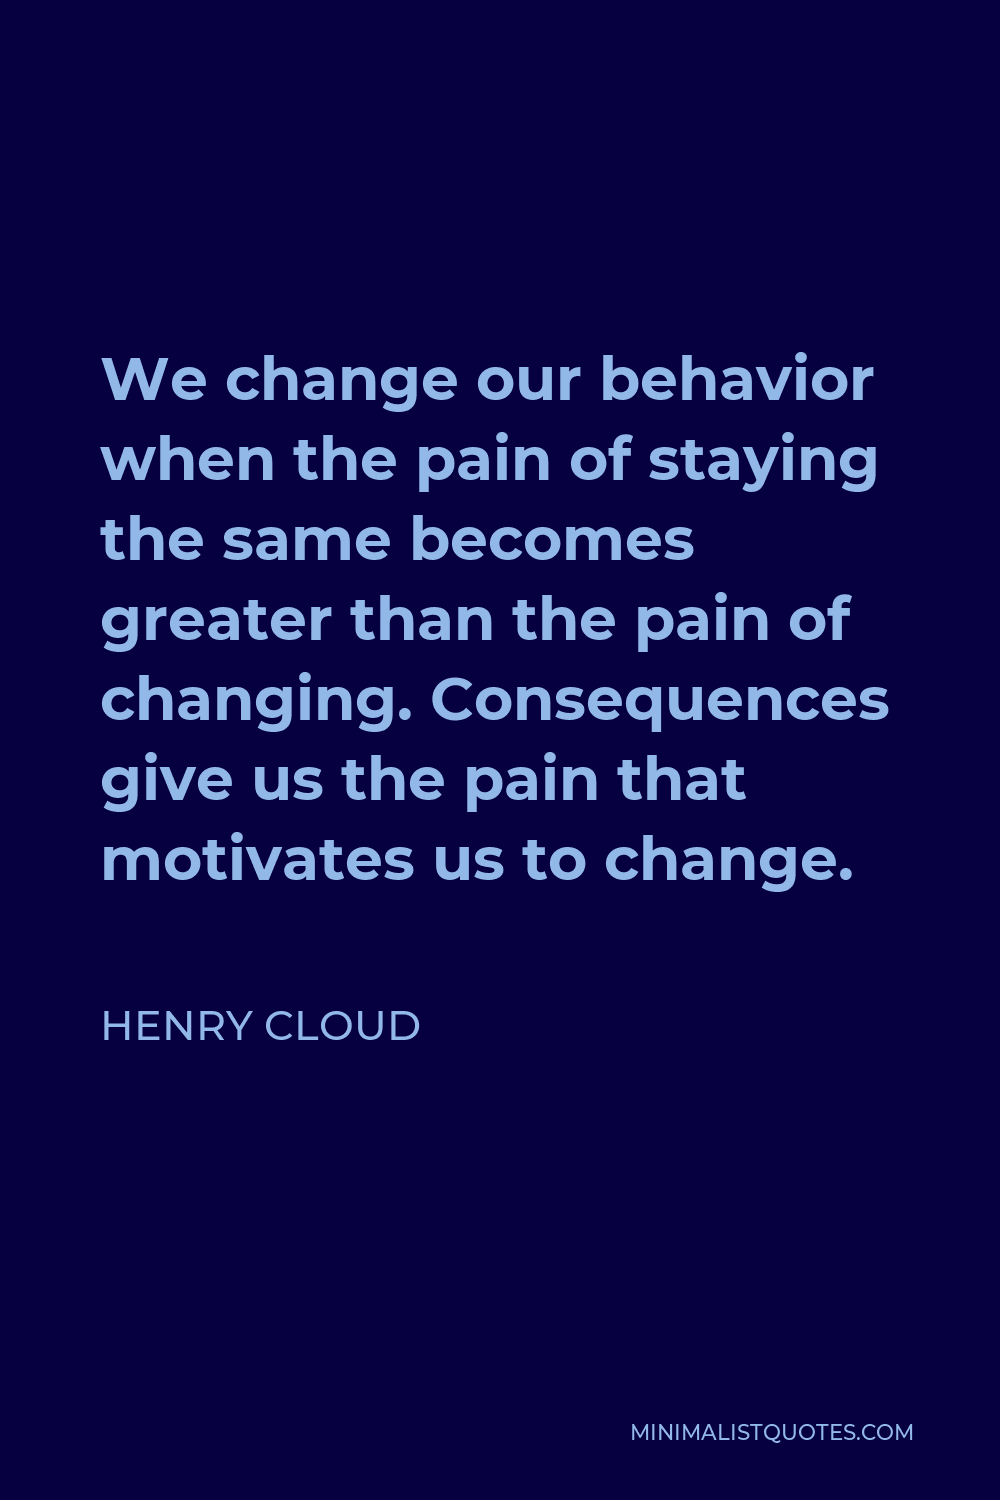 Henry Cloud Quote - We change our behavior when the pain of staying the same becomes greater than the pain of changing. Consequences give us the pain that motivates us to change.